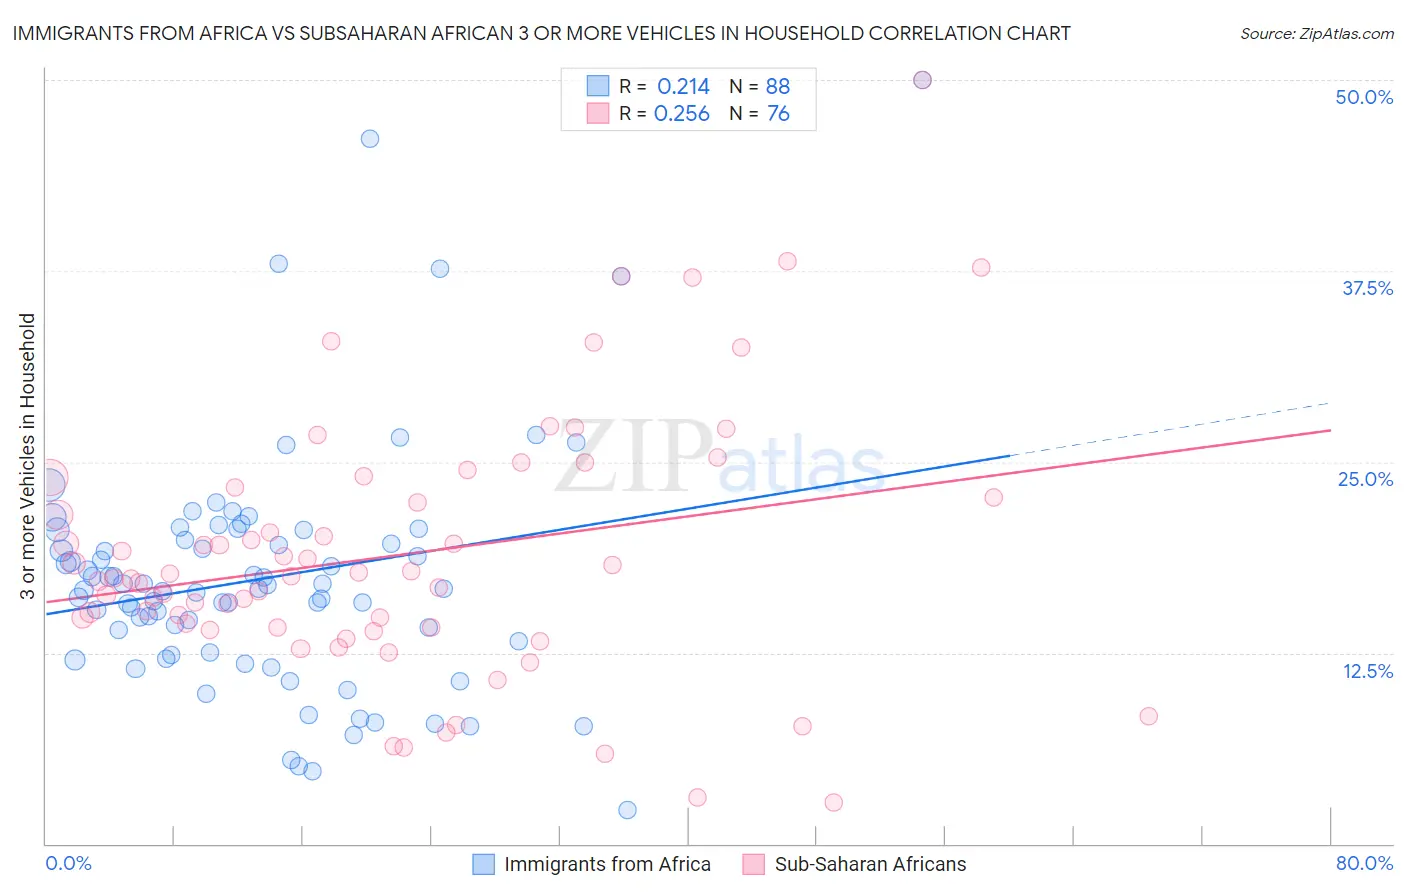 Immigrants from Africa vs Subsaharan African 3 or more Vehicles in Household